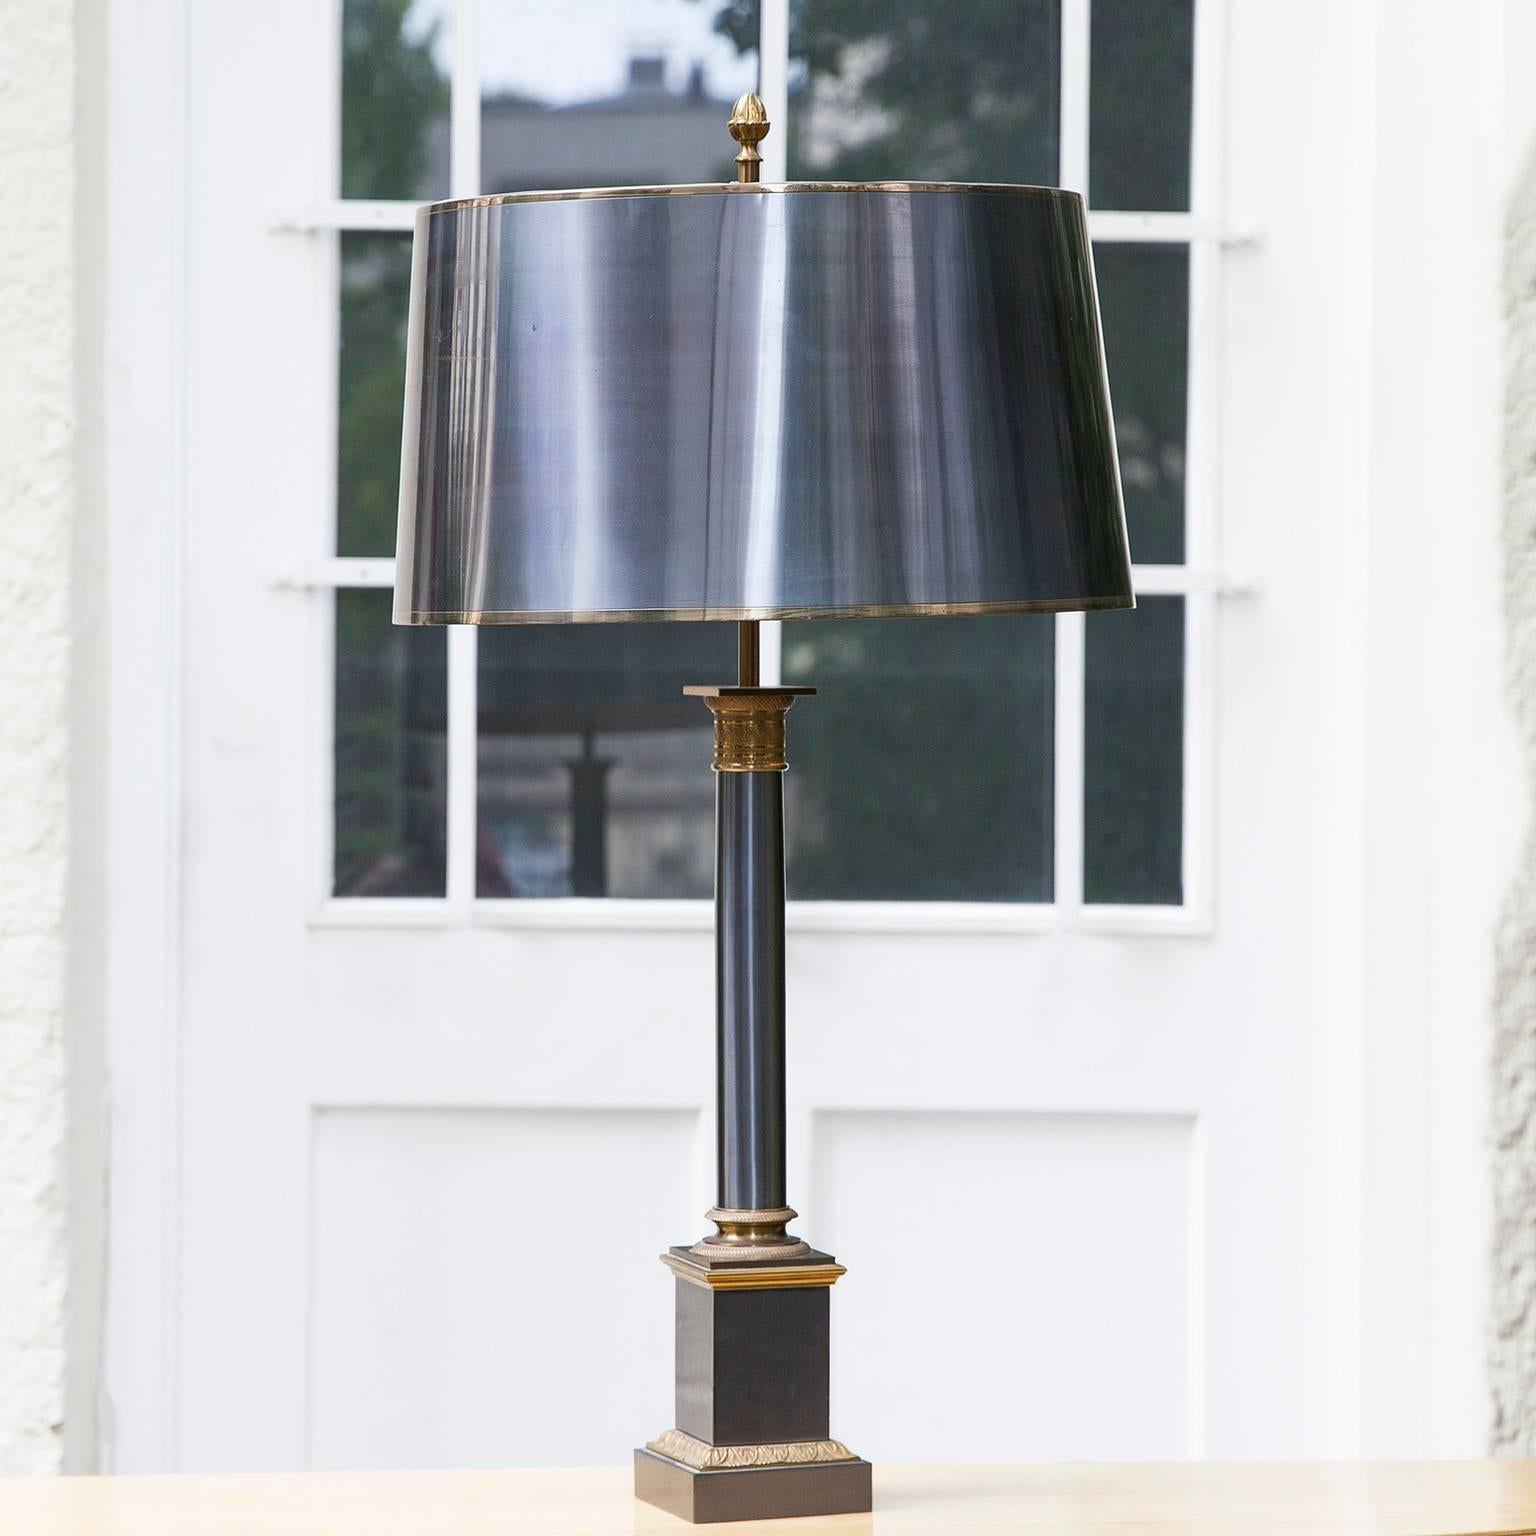 “Colonne Corynthien” table lamp from the Classique collection of Maison Charles with signature. Anodized bronze with brass details. Original metal shade, France, 1970s.

Measure: H 86 x D 46 cm.